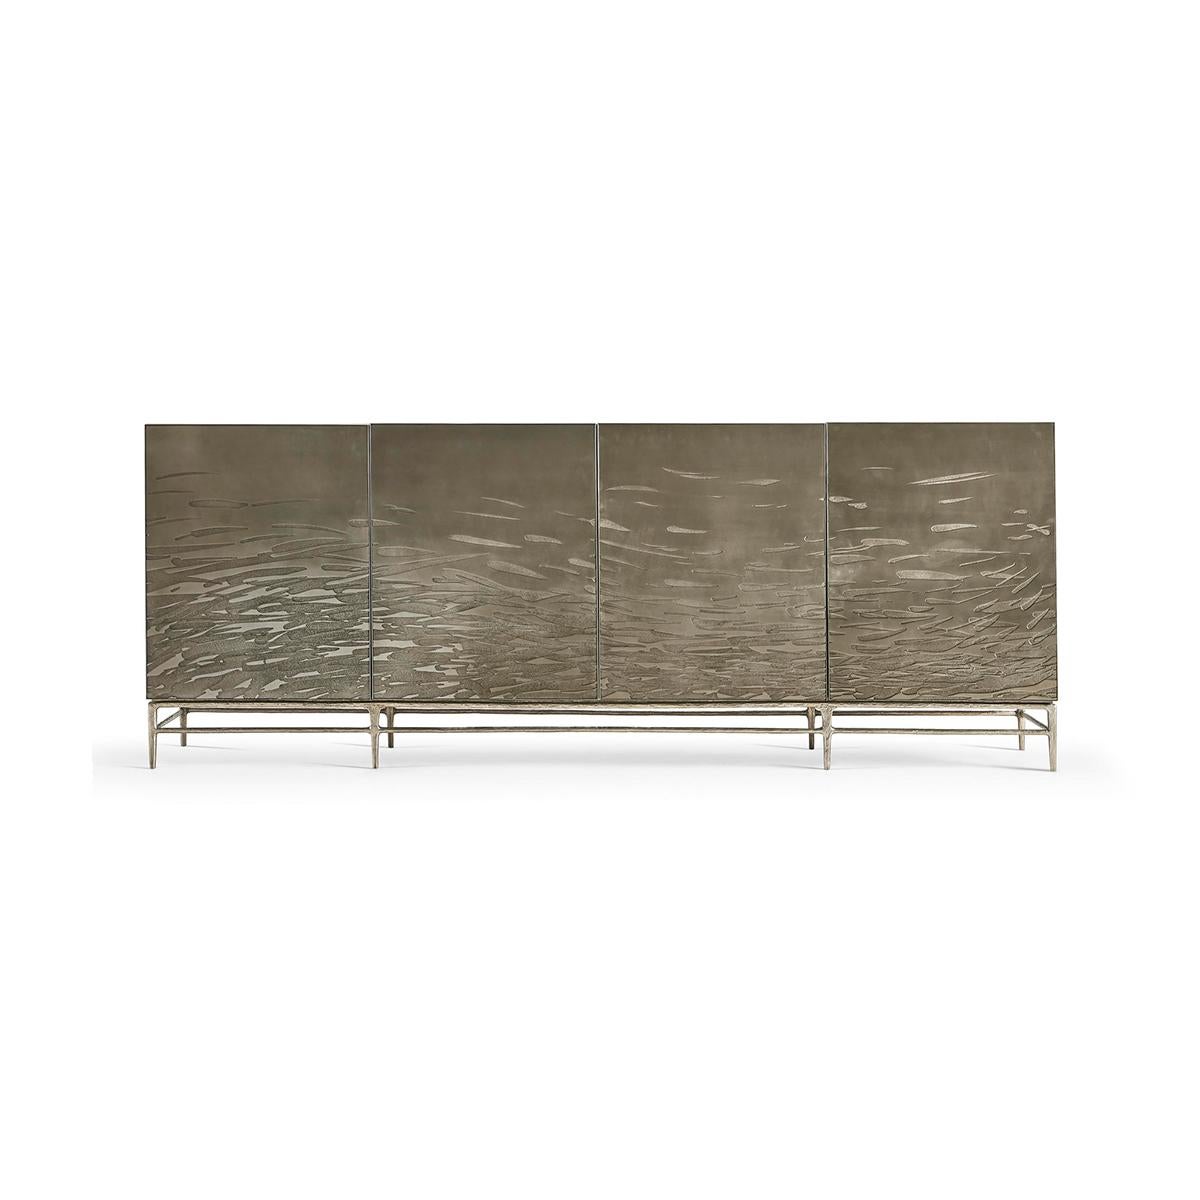 Bleached oak and metal create a stunning cabinet. The modern cabinet with age-old acid etched techniques on steel doors with an abstract flowing water motif in relief. Sitting atop delicate natural flared metal legs with a stretcher.

The interior